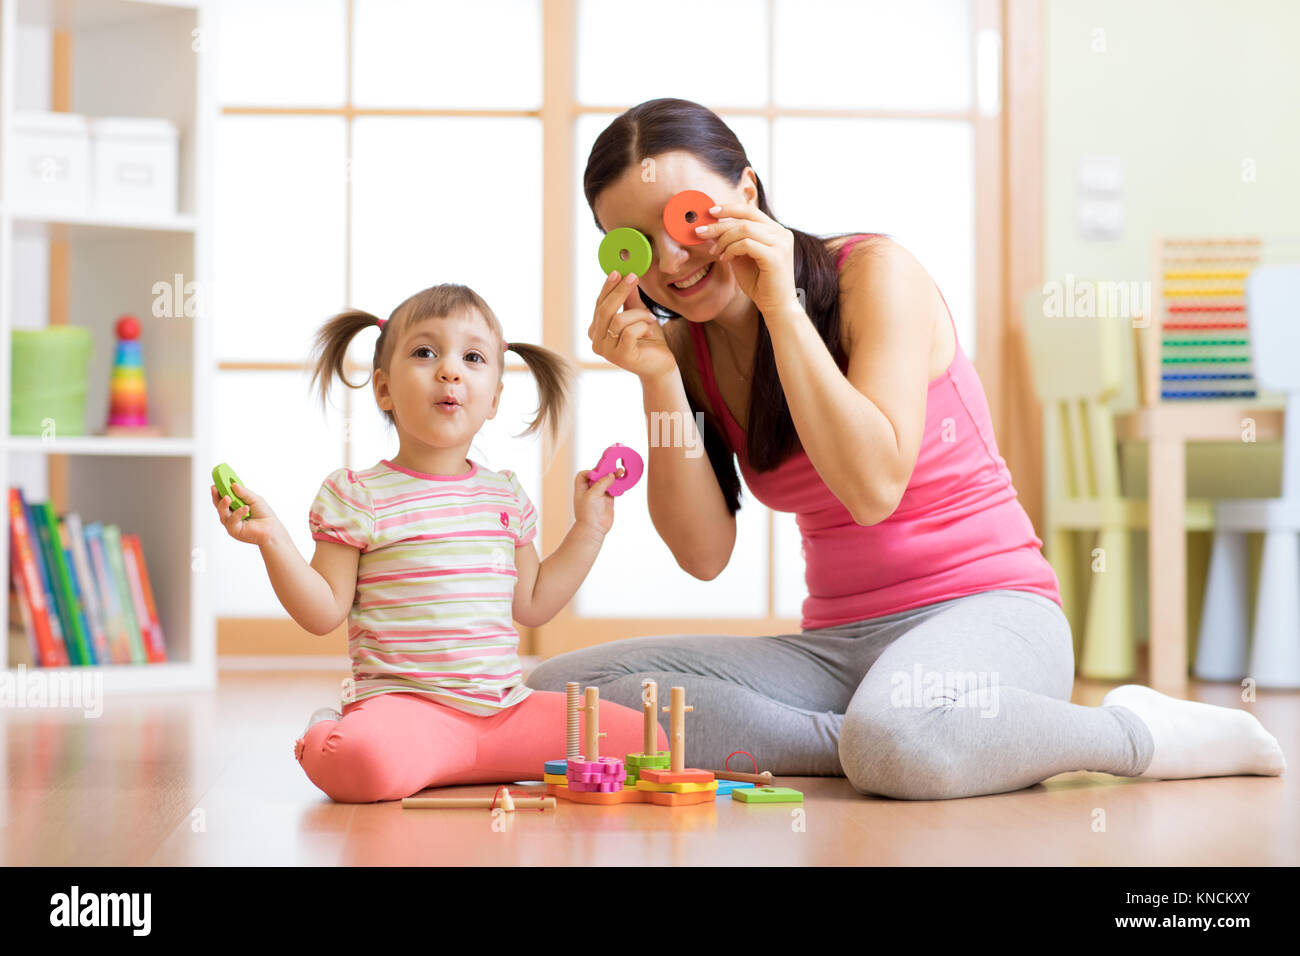 Mother and daughter play on floor having a fun pastime Stock Photo